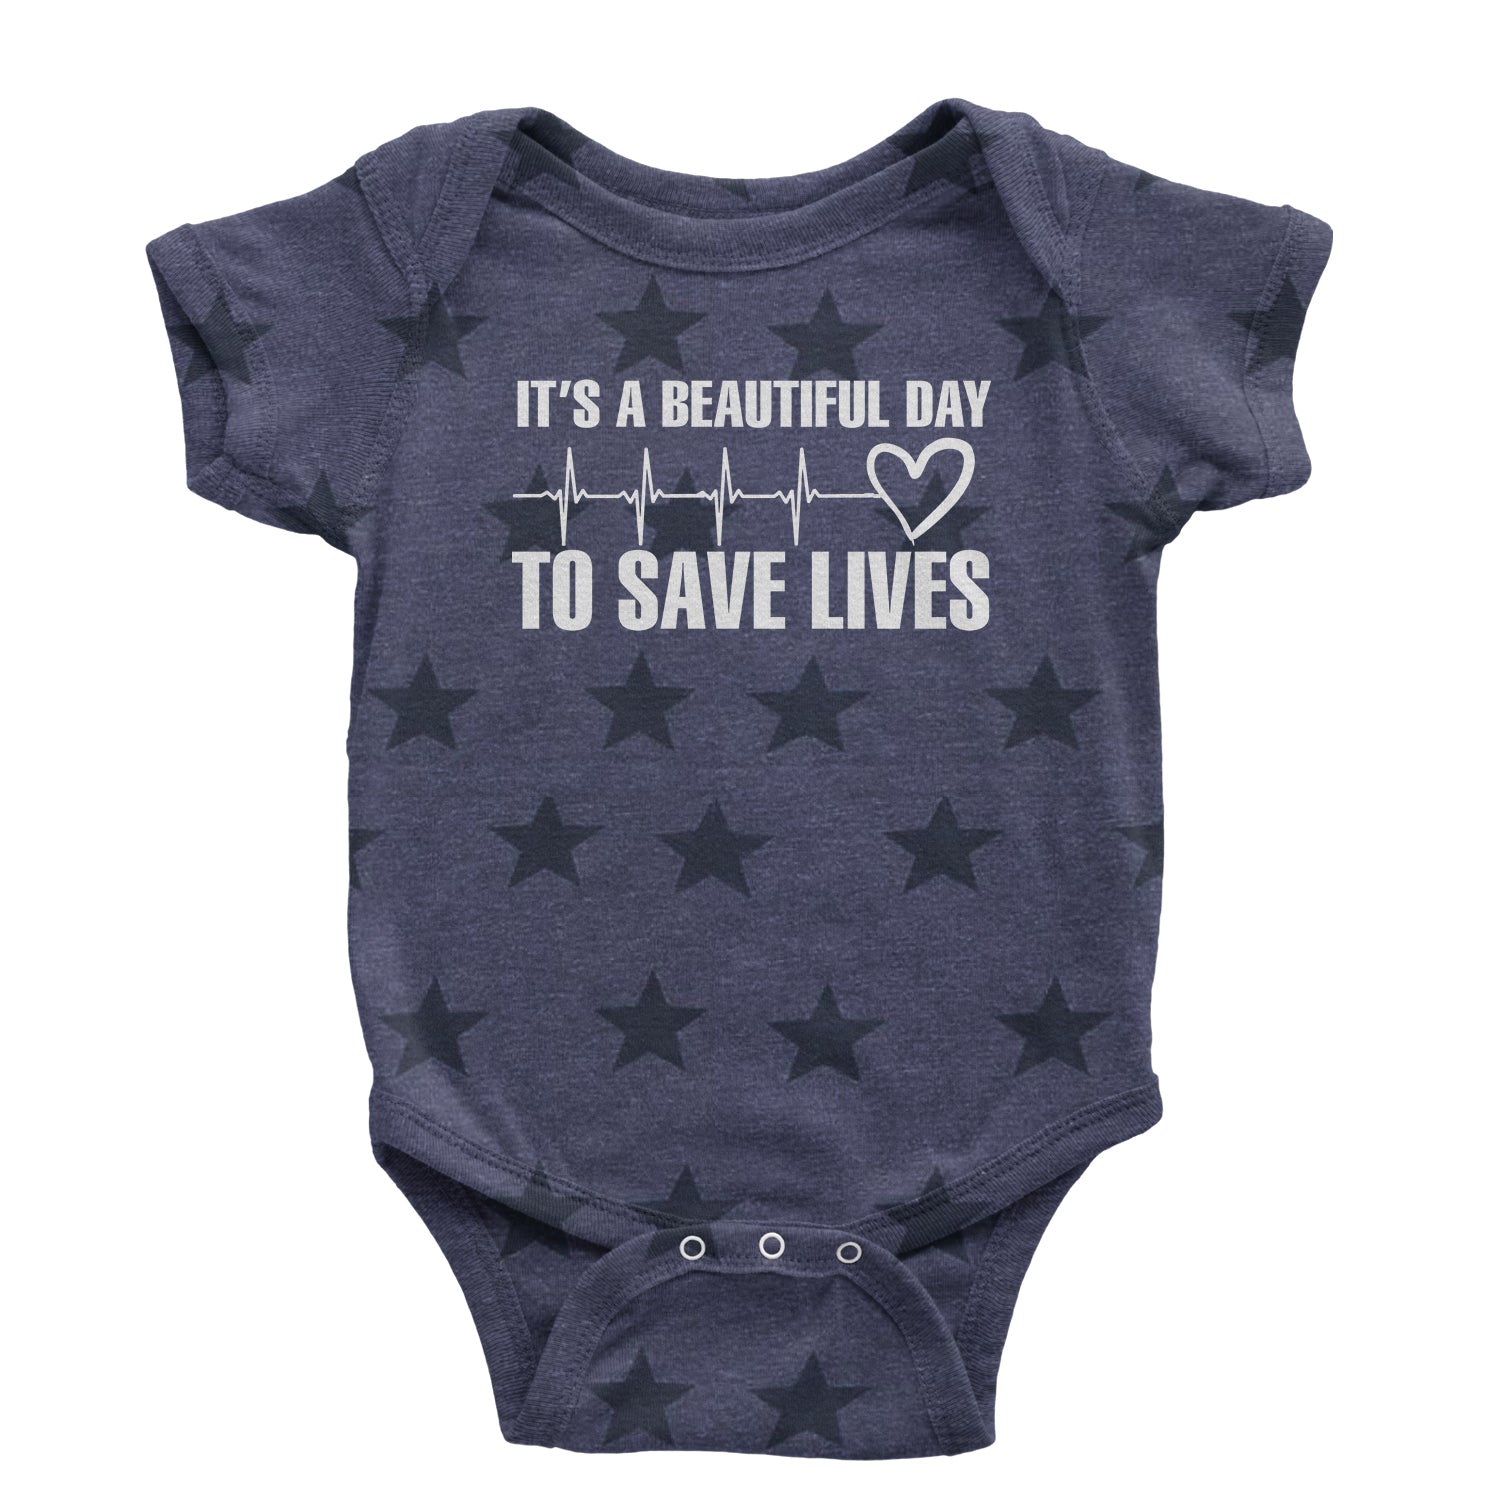 It's A Beautiful Day To Save Lives (White Print) Infant One-Piece Romper Bodysuit and Toddler T-shirt #expressiontees by Expression Tees